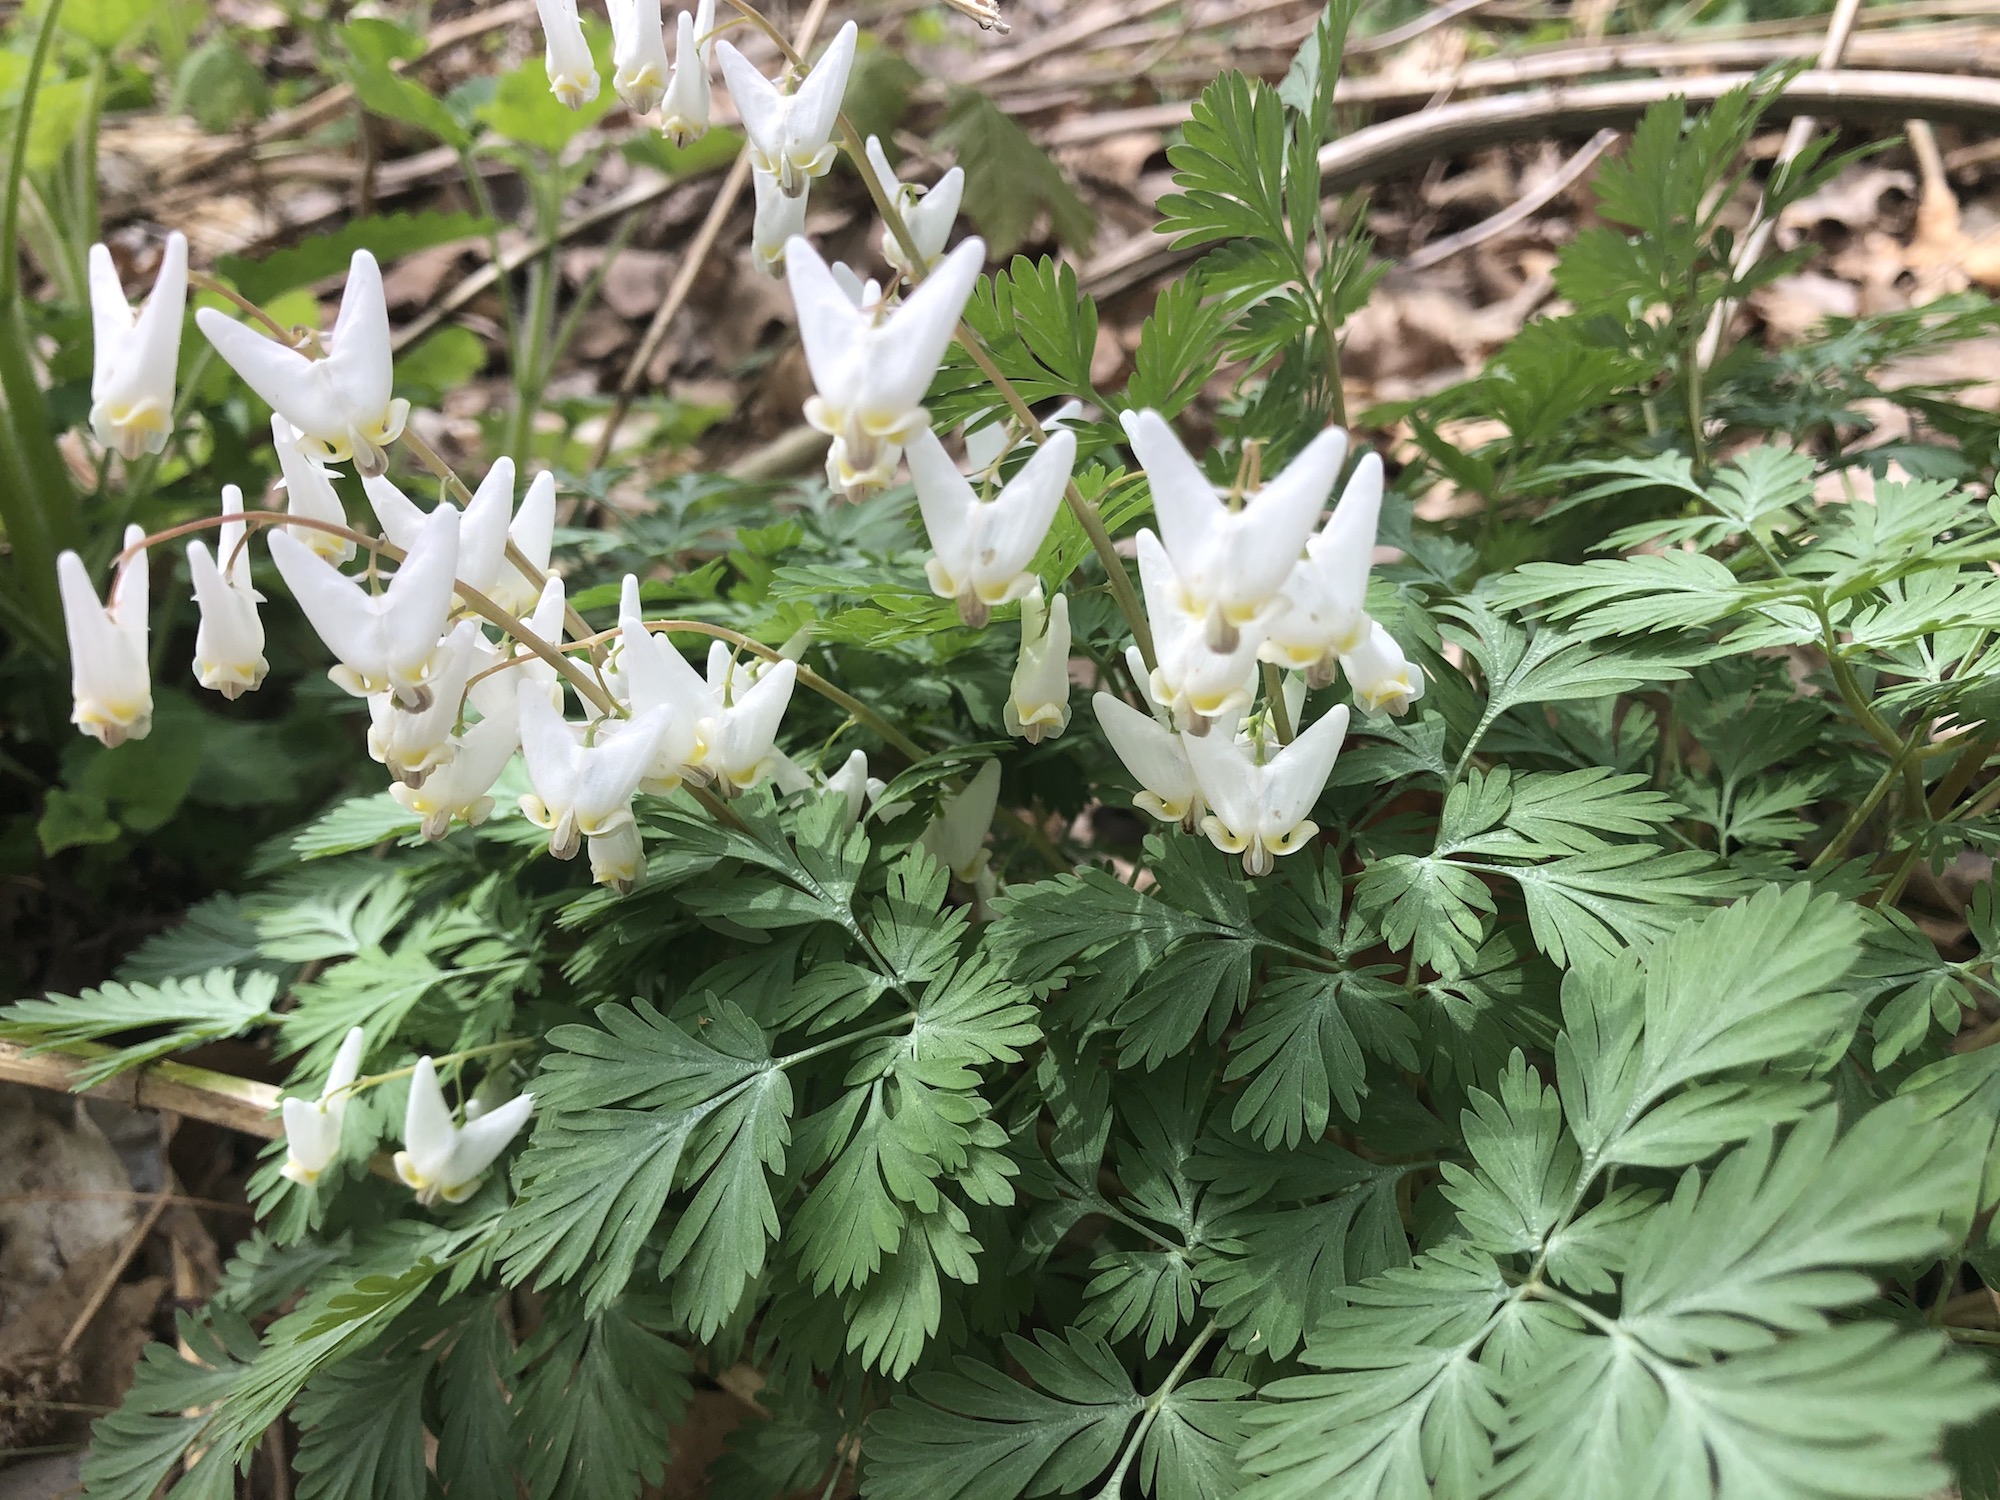 Dutchman's Breeches in the Maple-Basswood Forest of the University of Wisconsin Arboretum on May 4, 2020.